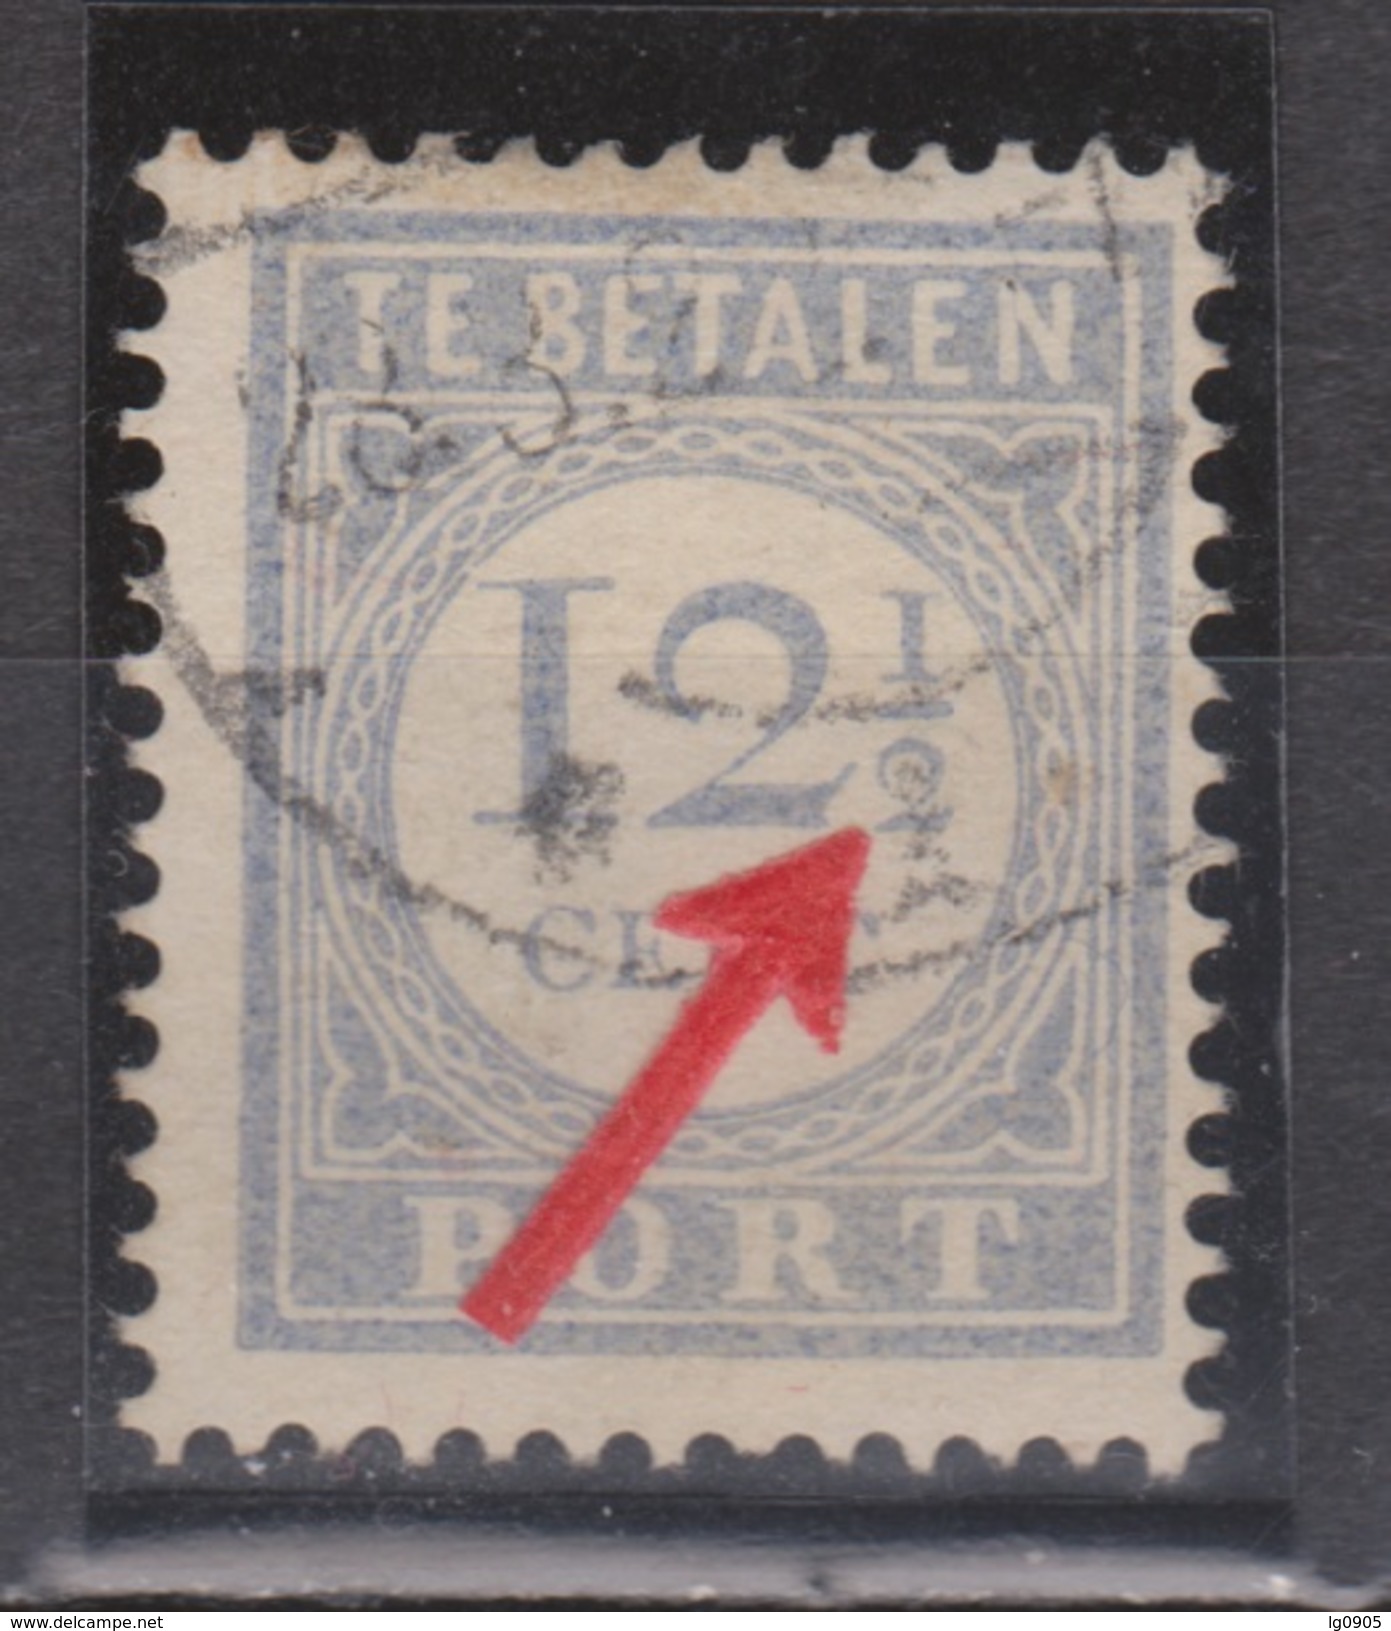 NVPH Nederland Netherlands Pays Bas Holanda 56 Type 2 Used Port Timbre-taxe Postmarke Sellos Correos NOW MANY DUE STAMPS - Strafportzegels